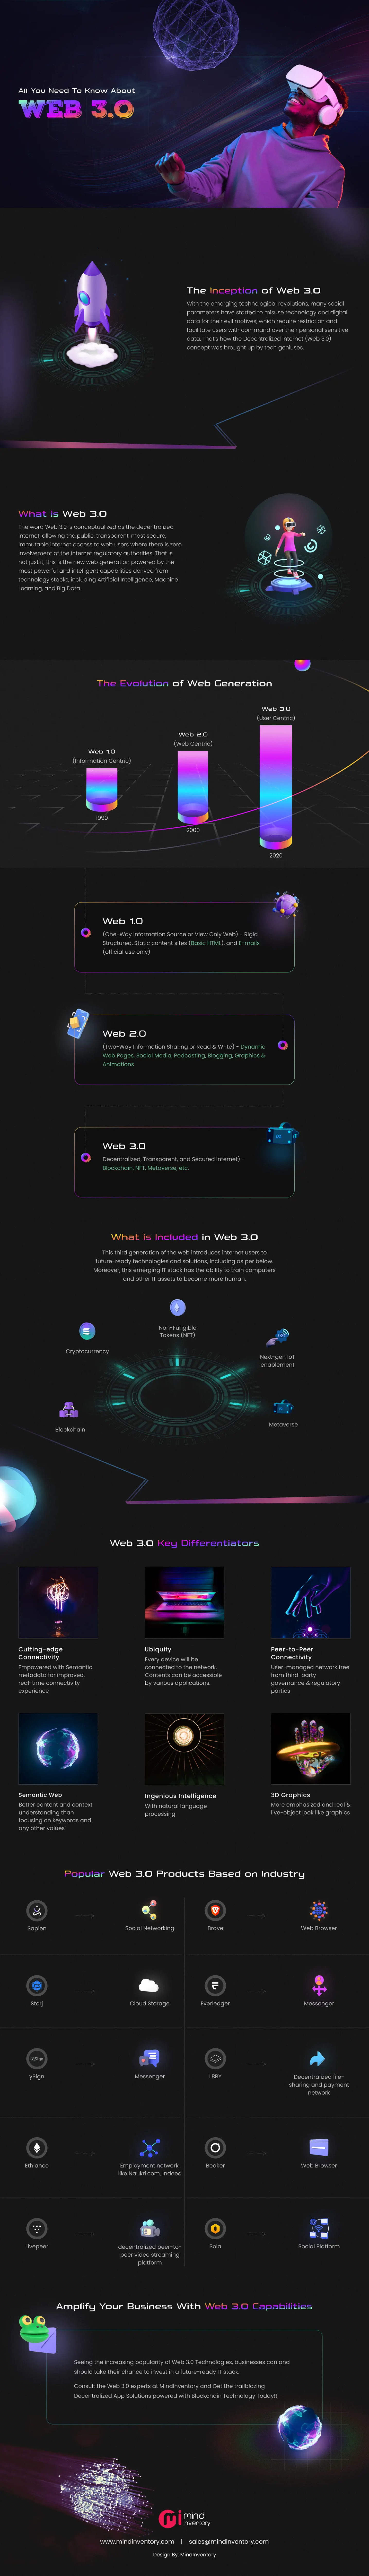 Web 3.0 all you need to know infographic